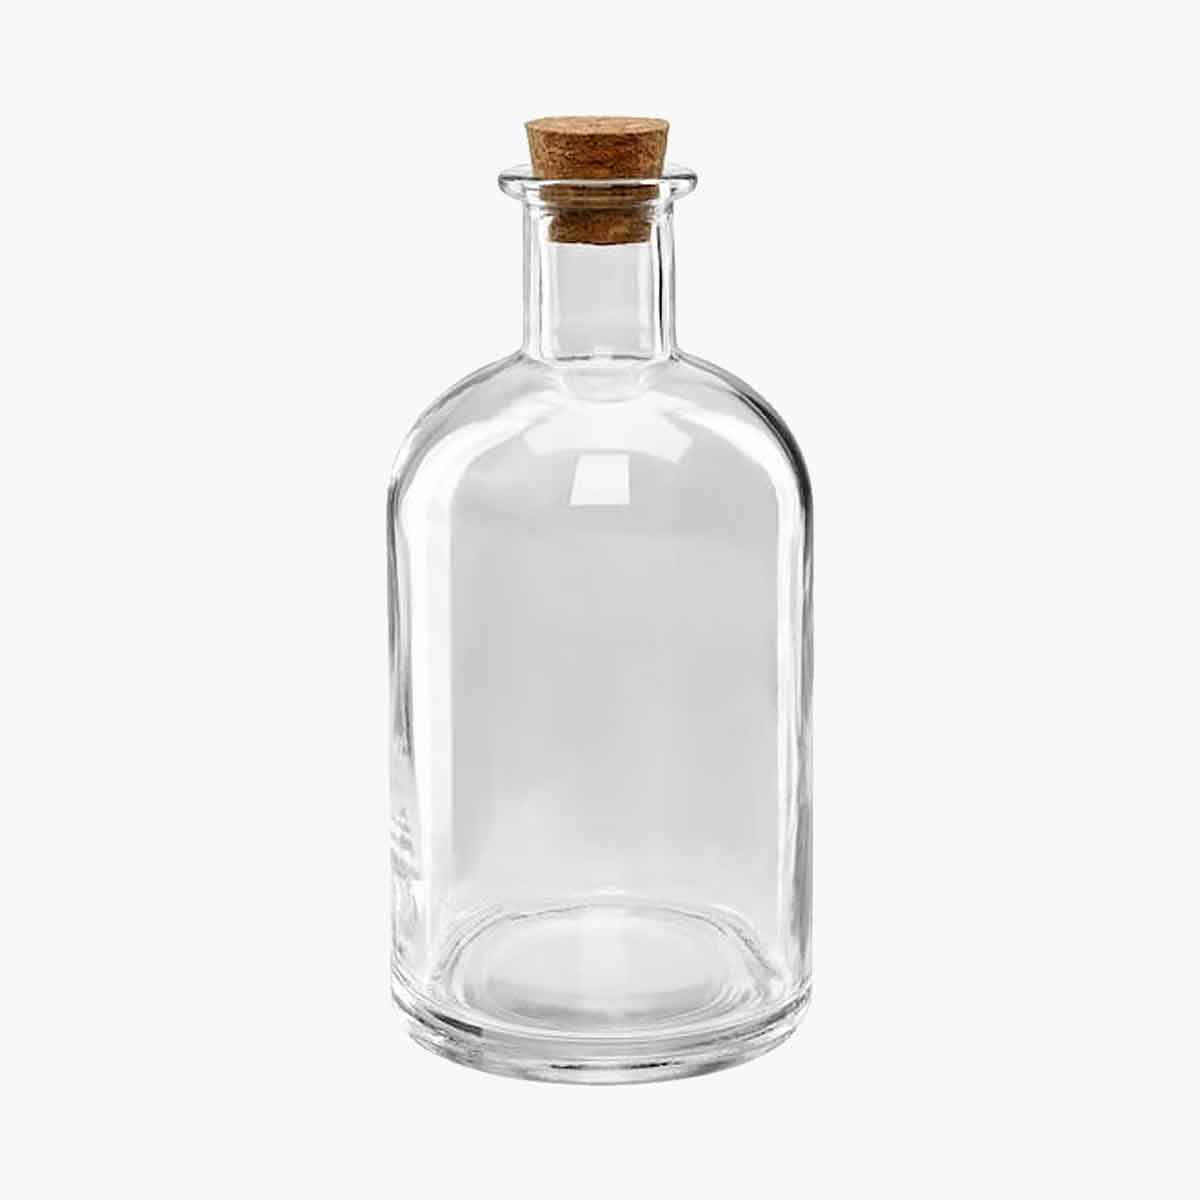 A round clear glass bottle with a small cork in it.